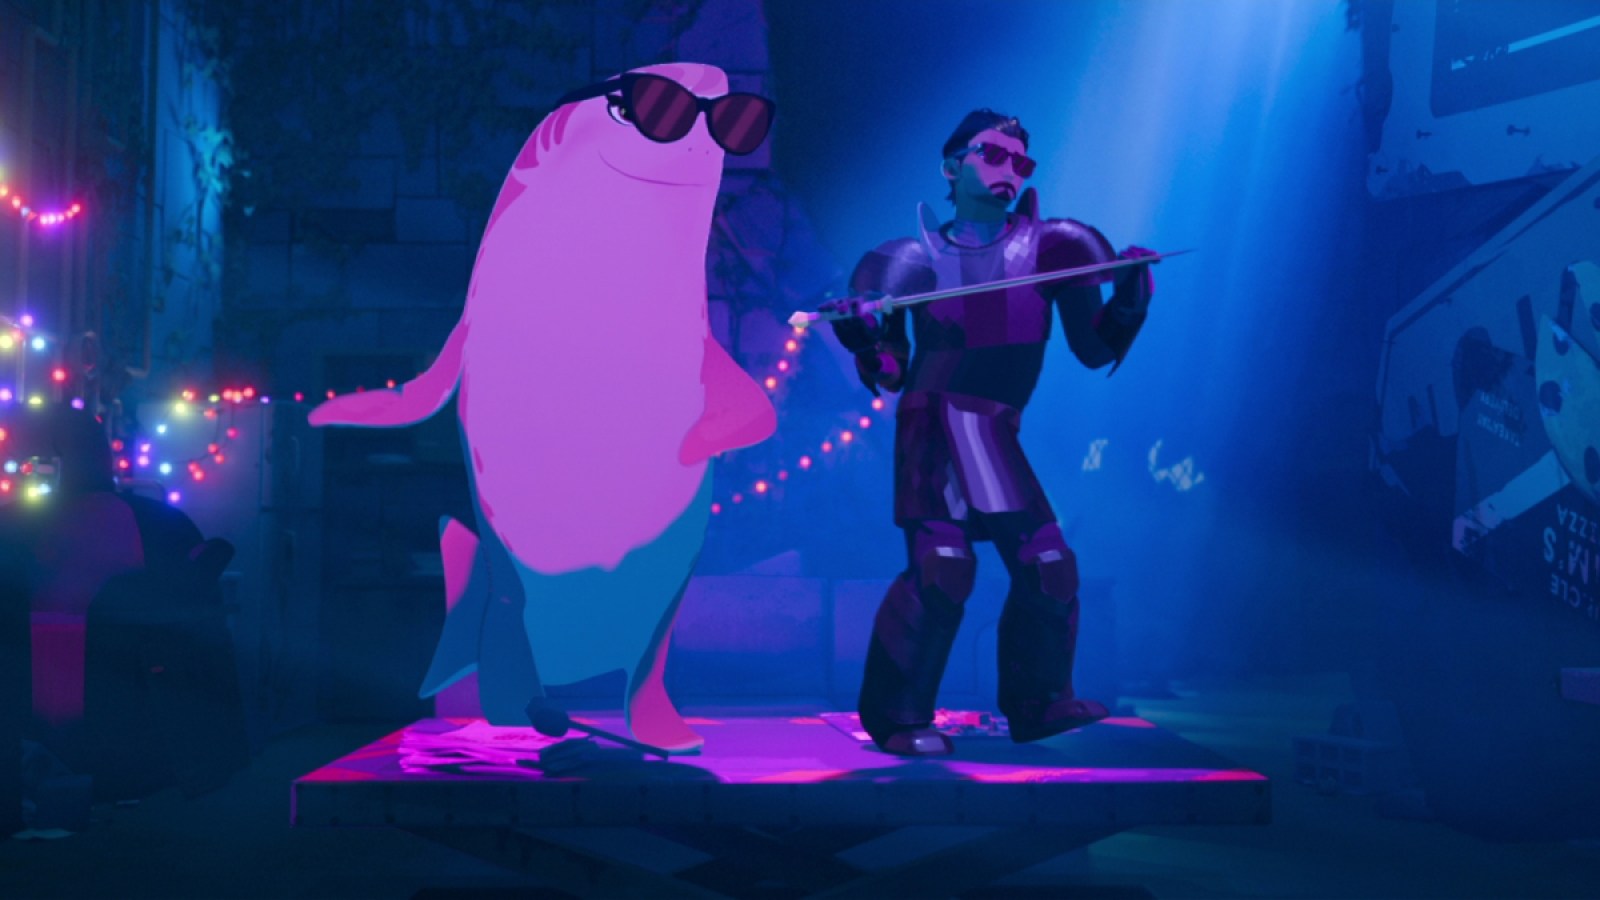 Nimona (in shark form) and Ballister dance together